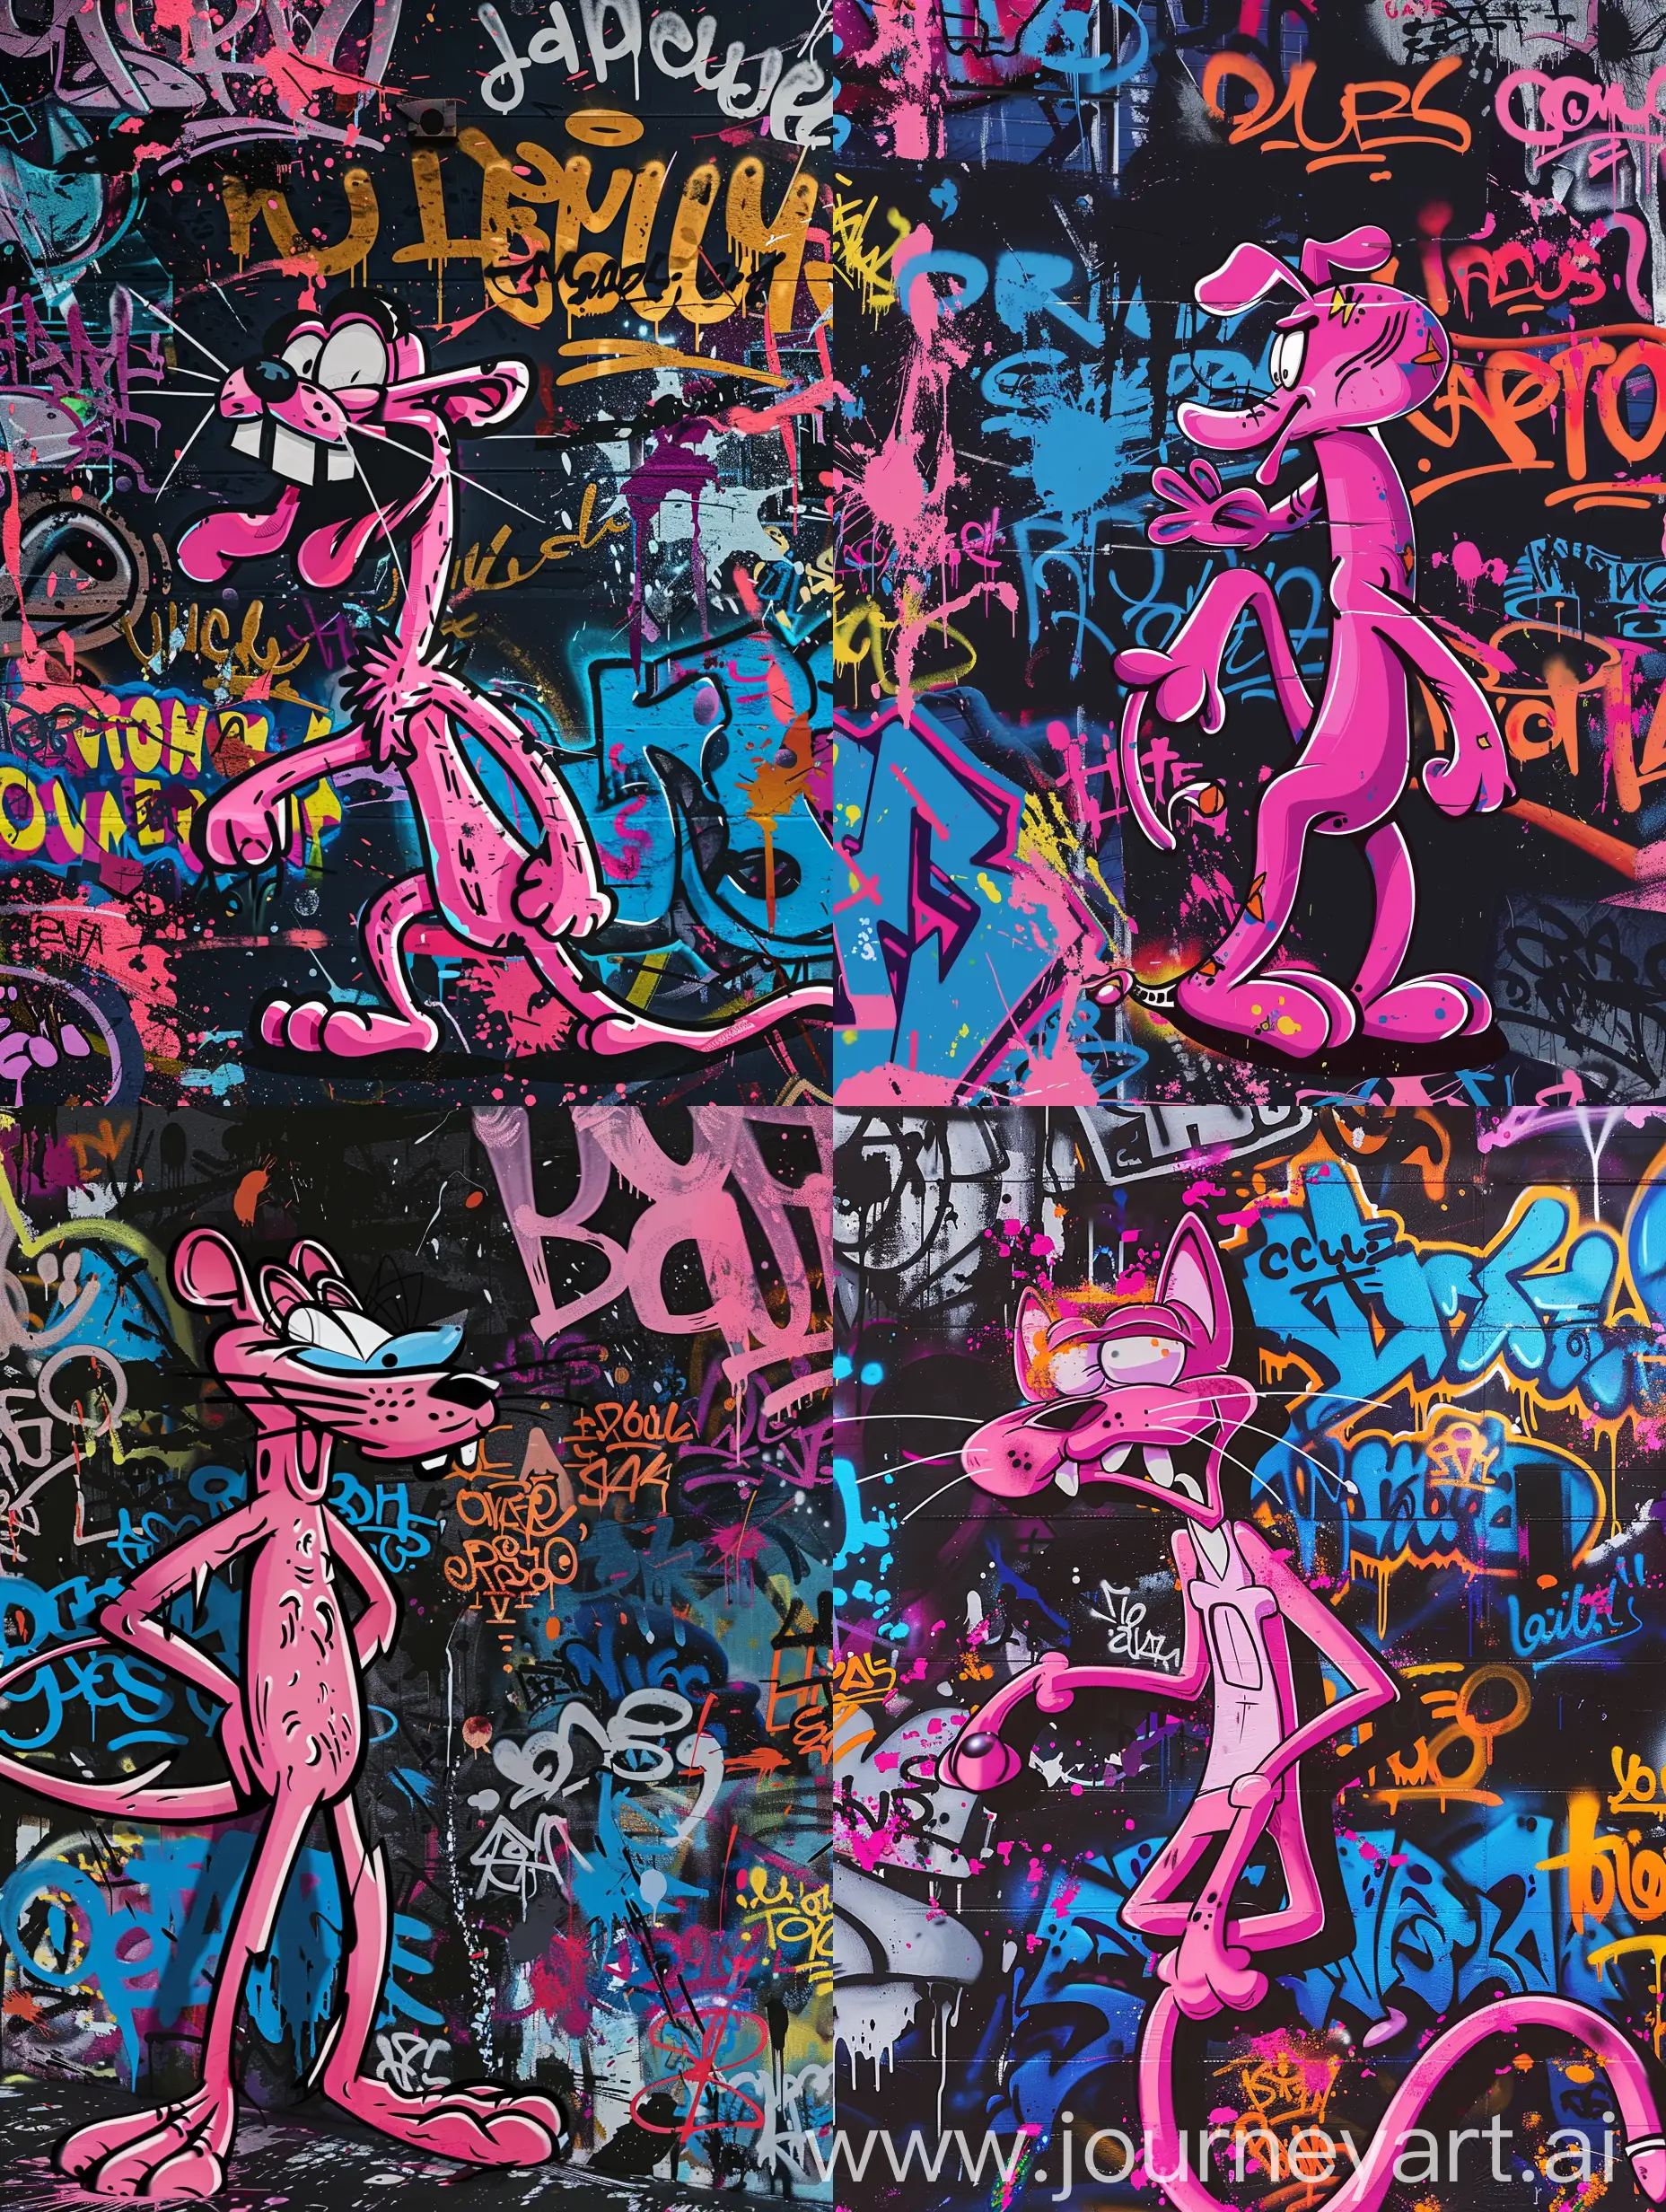 flat illustration graffiti on cava:2, Fantasy illustration of jacques clouseau pink panther character, graffiti, traditional vibrant, urban, detailed, tag, background full of dark paint splash and graffiti text, random sized graffiti text all over typography:2, nightmare, scary urban canva texture